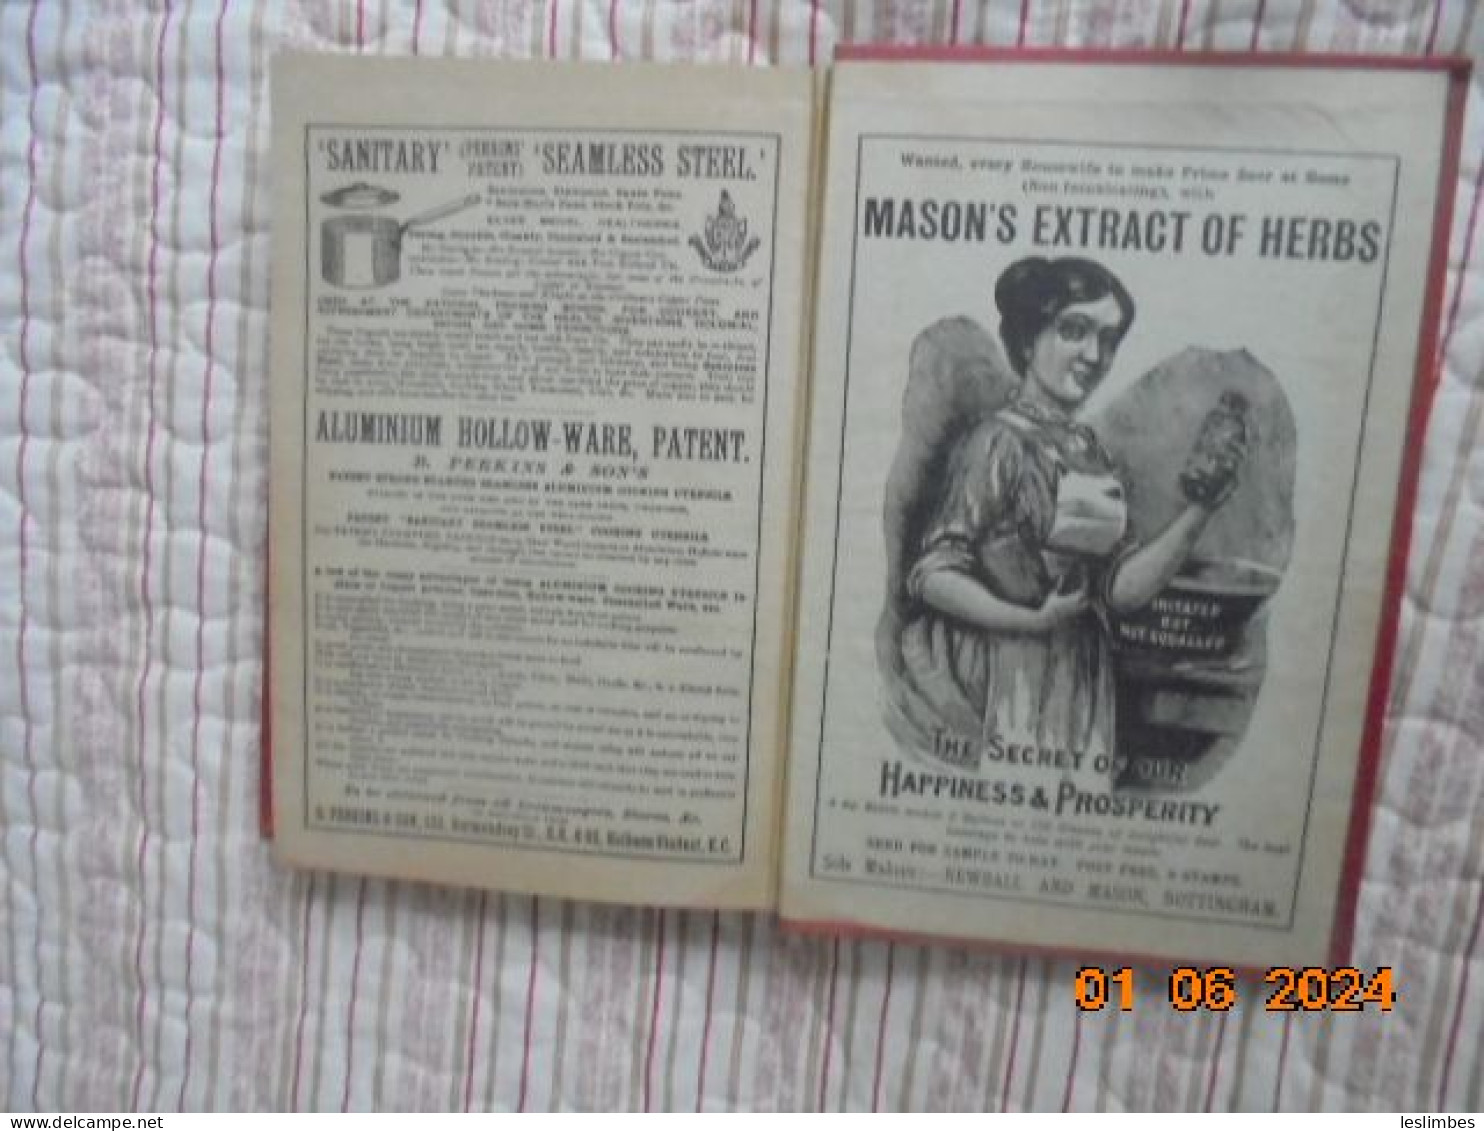 Mrs Beeton's Cookery Book and Household Guide. 1898 New & enlarged edition. 516 columns, 1000 receipts and instructions